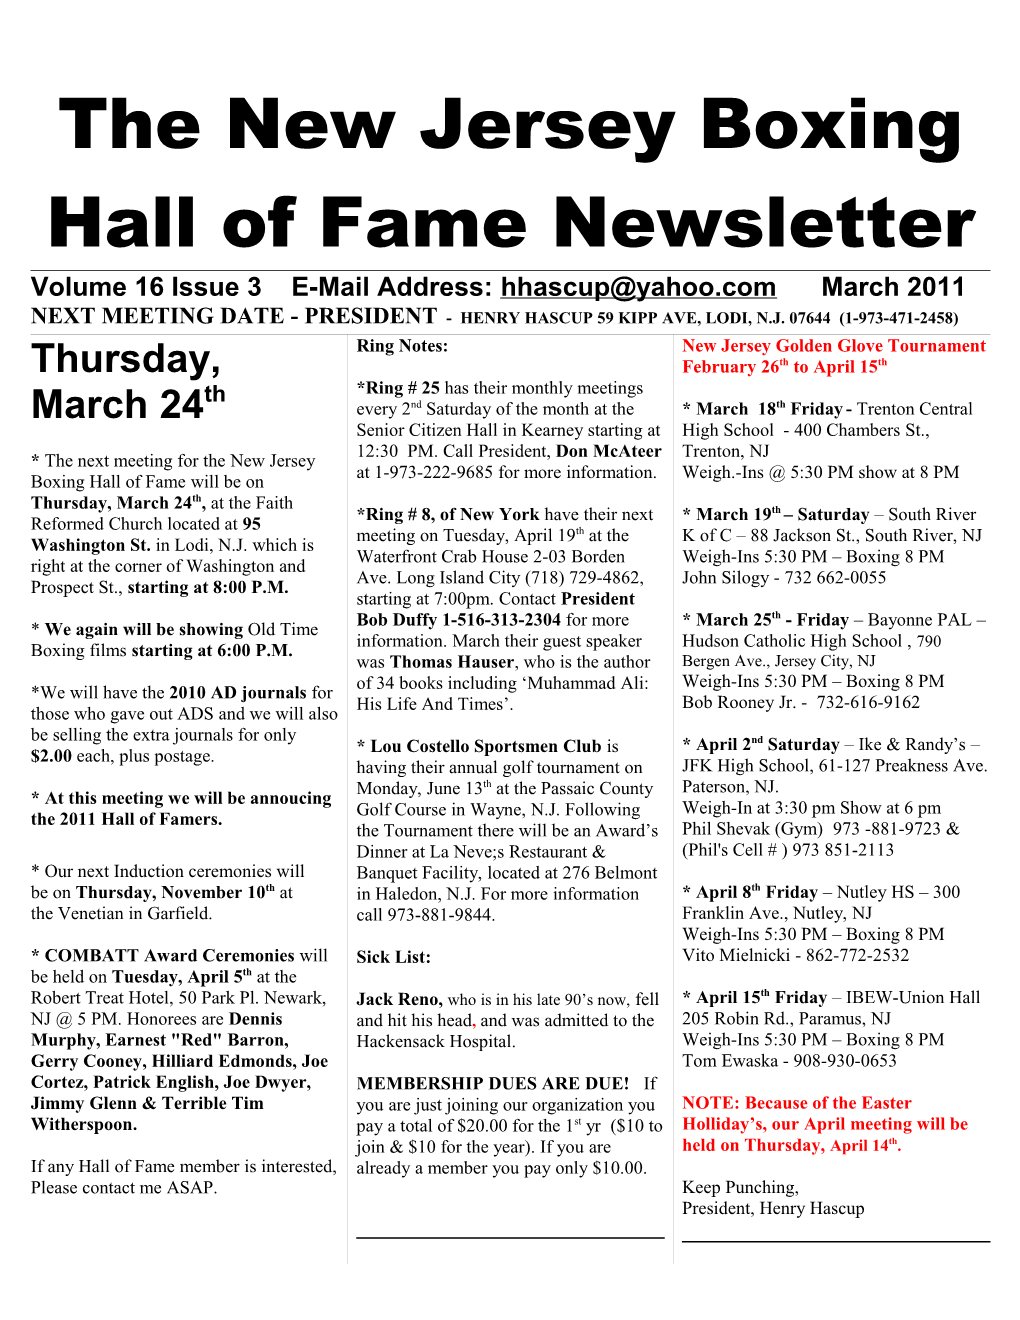 The New Jersey Boxing Hall of Fame Newsletter s1